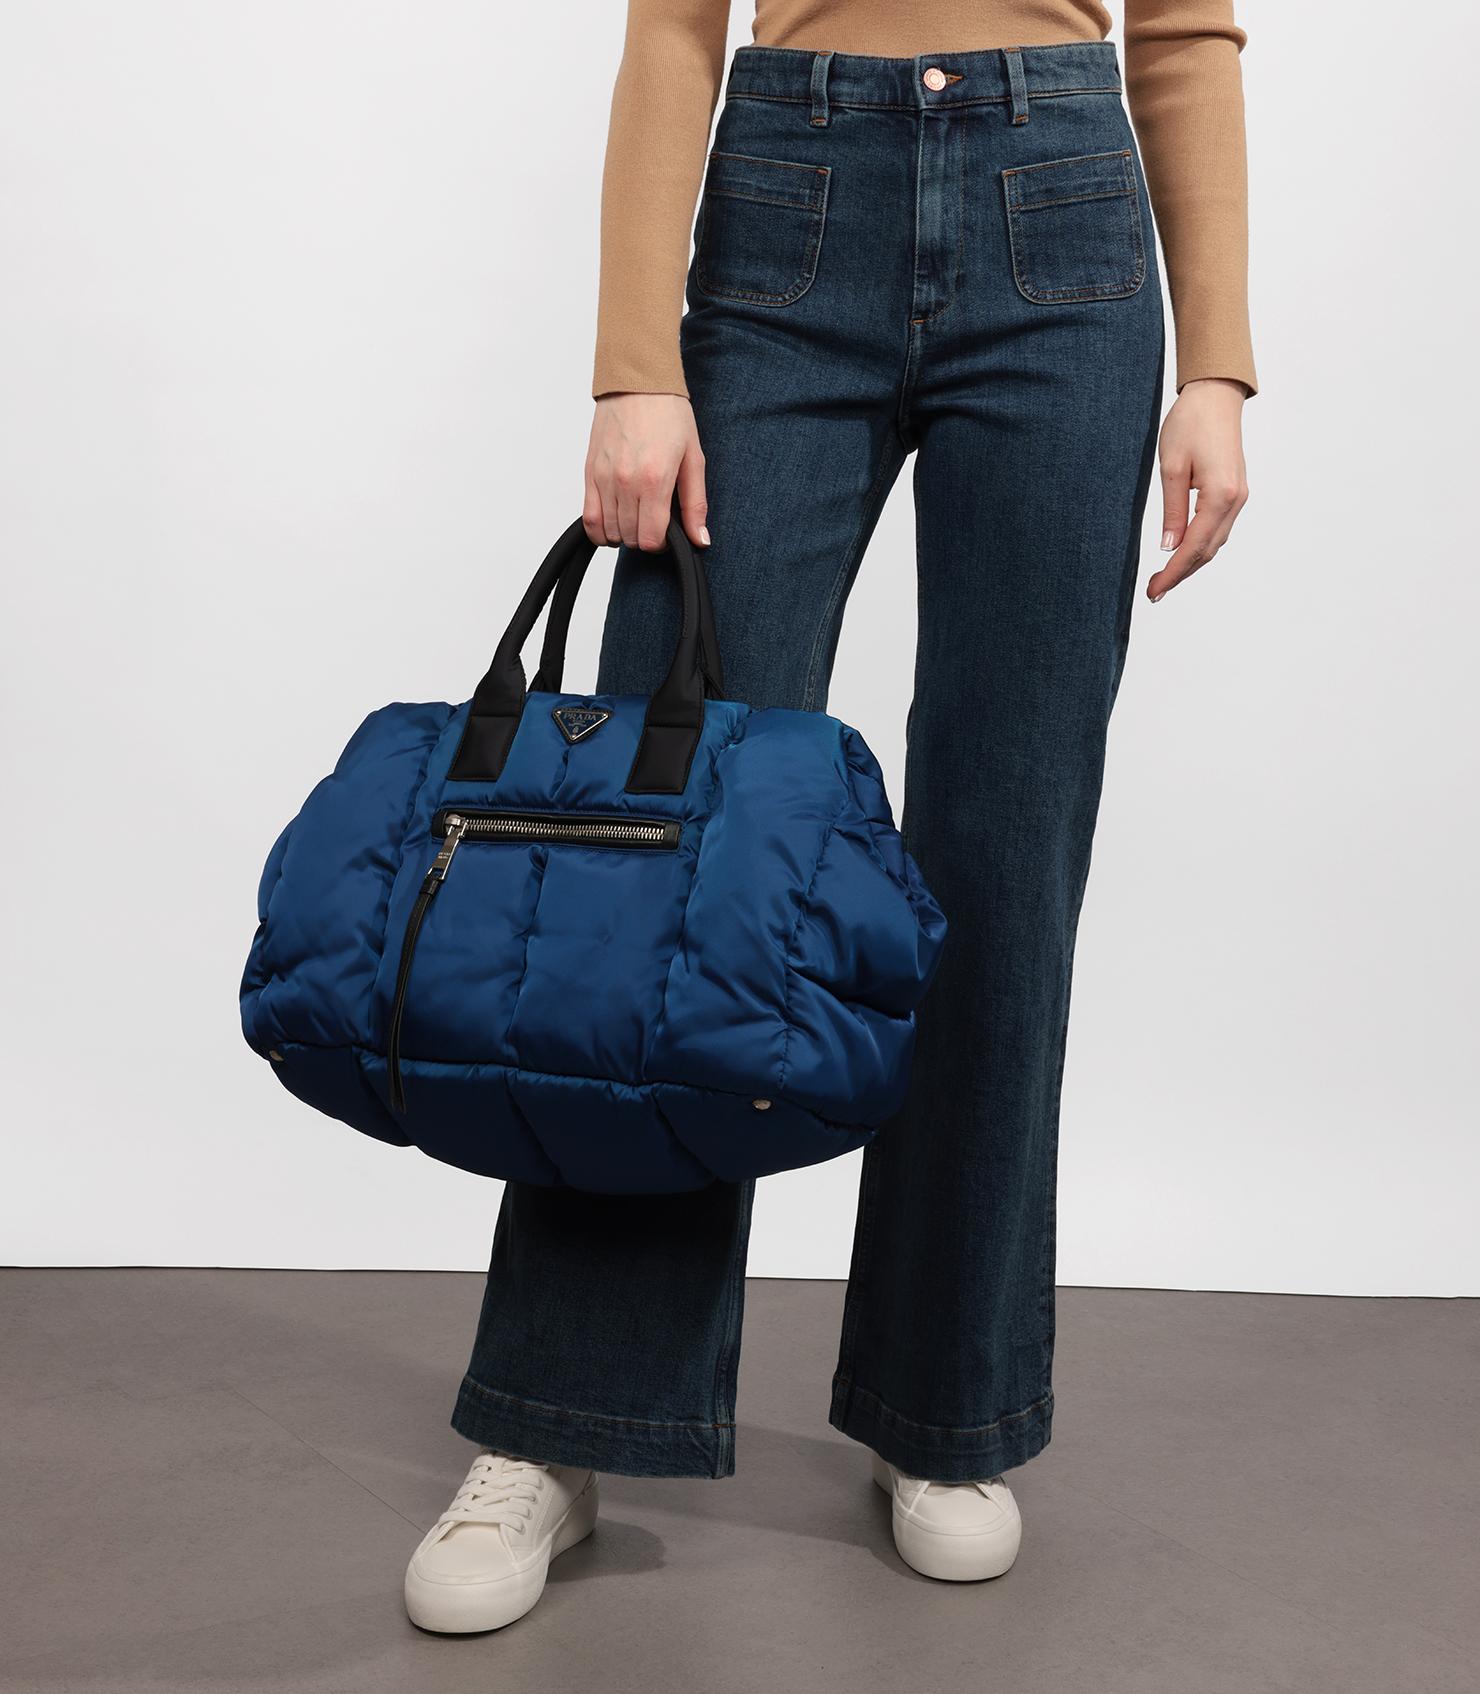 Prada Blue Nylon Tessuto Bomber Tote

Brand- Prada
Model- Bomber Tote
Product Type- Crossbody, Shoulder, Tote
Serial Number- Not Present
Age- Circa 2020
Accompanied By- Shoulder Strap
Colour- Blue
Hardware- Silver 
Material(s)- Nylon

Condition